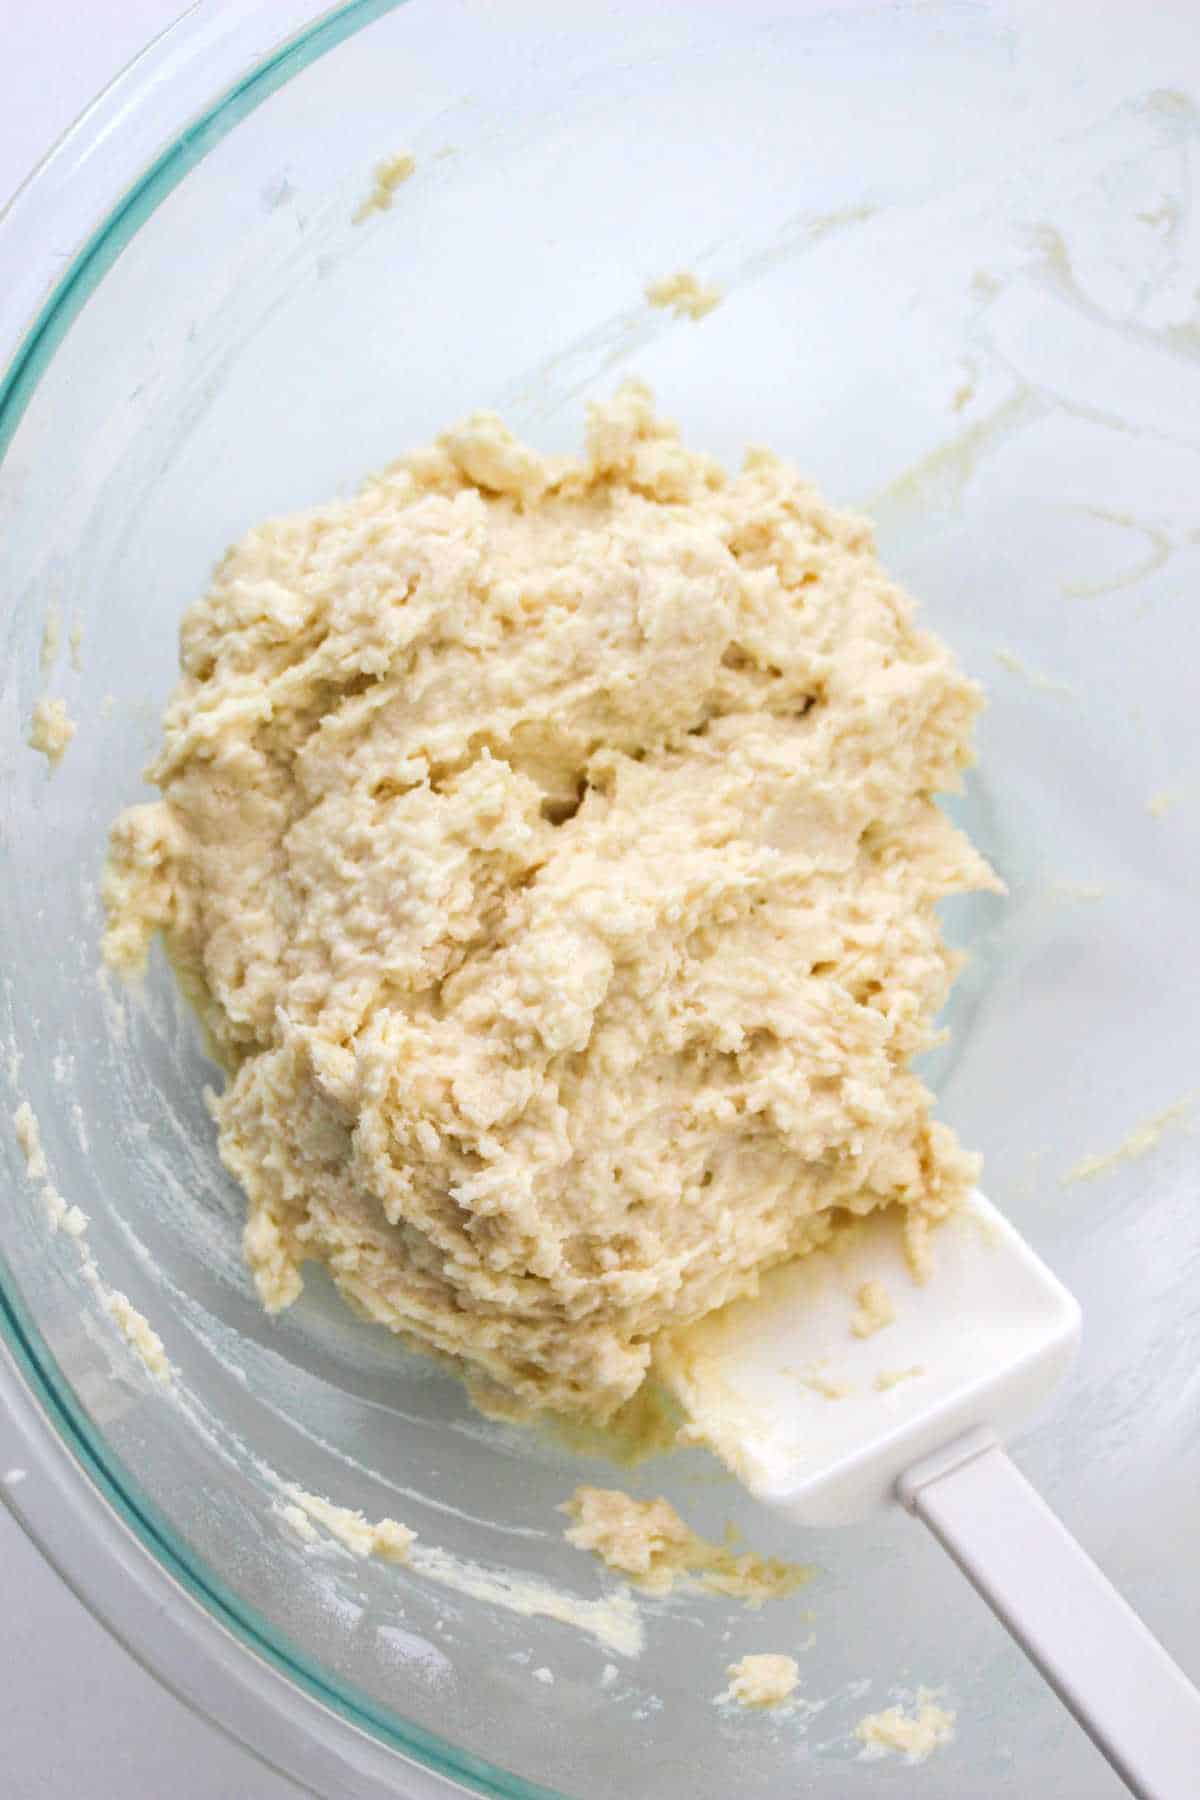 Mix the biscuit dough until JUST combined before turning out onto your work surface.